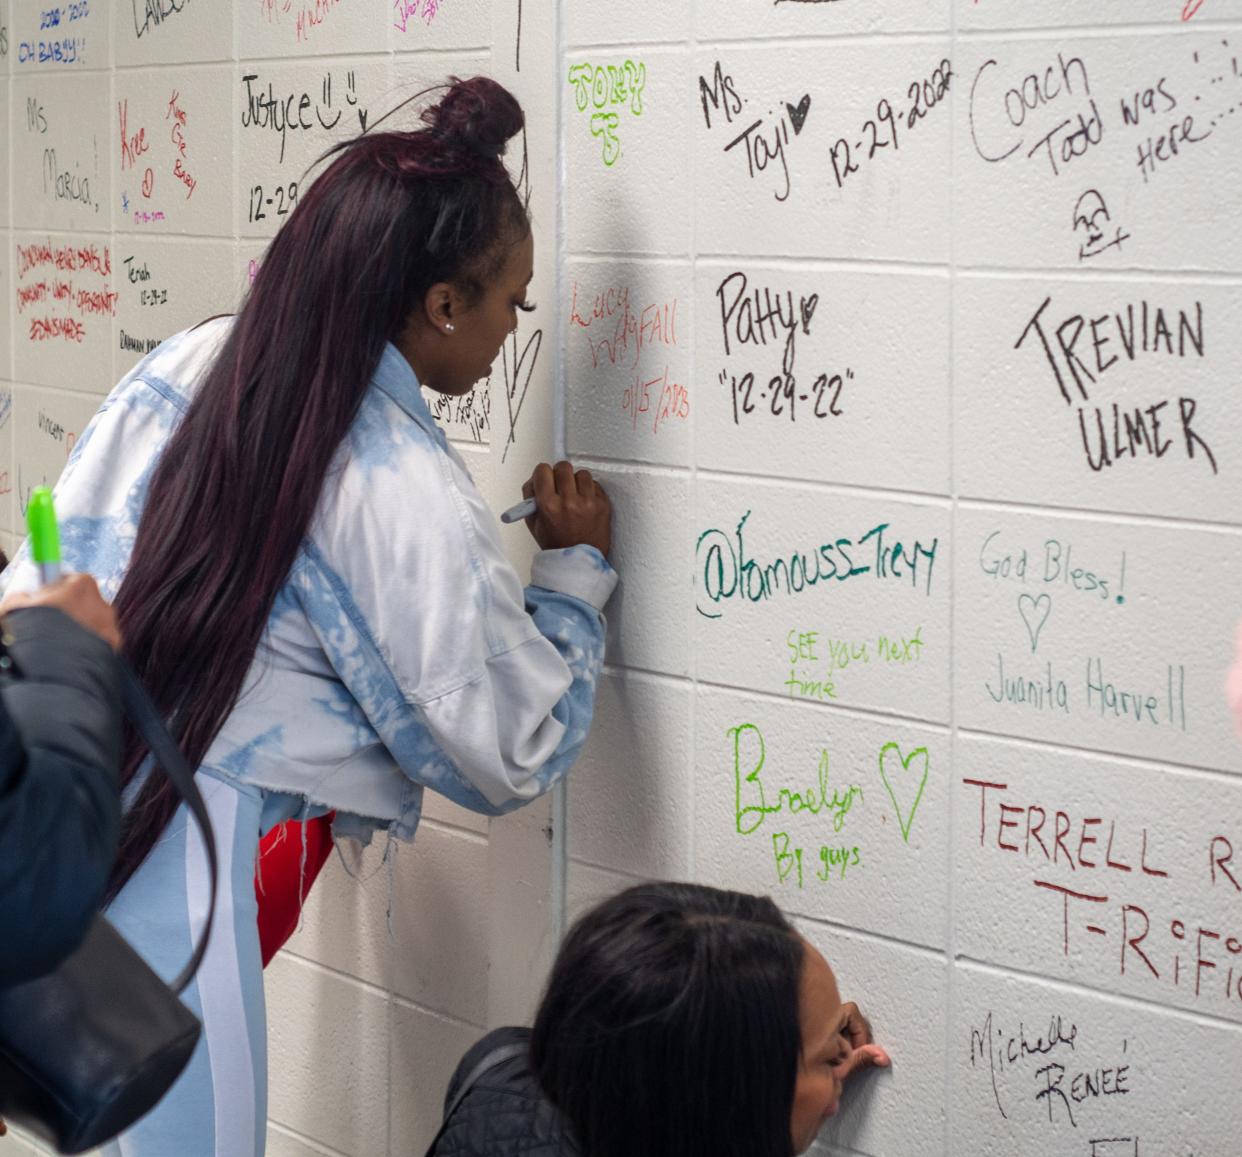 Numerous members of the South Bend community signed the walls of the old Martin Luther King, Jr. Community Center before it gets torn down and replaced.